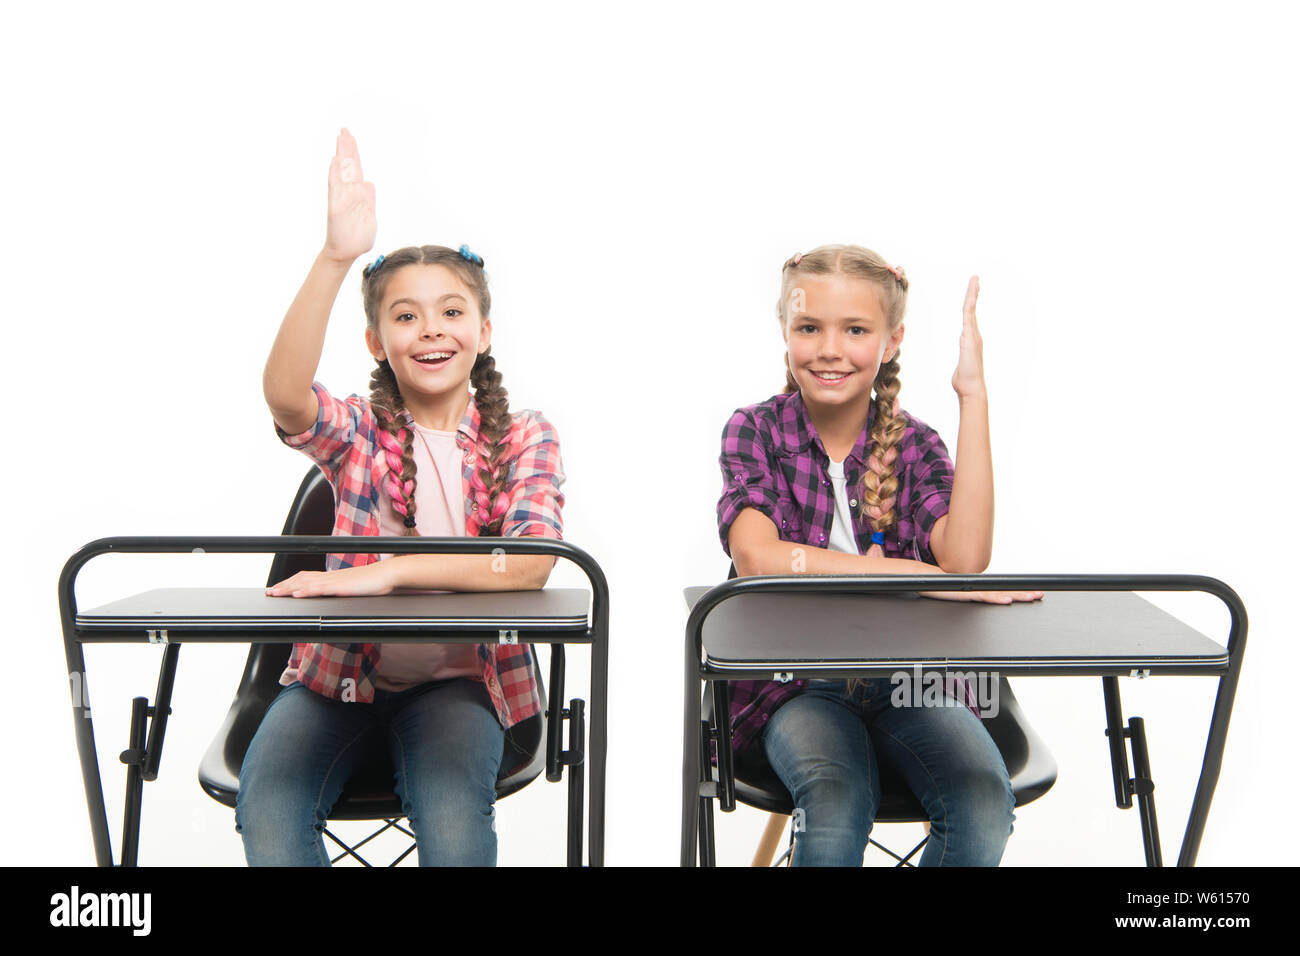 Free or private schooling. Little children enjoy home schooling. Small schoolgirls having compulsory schooling. Adorable kids with raised hands sitting at desks isolated on white. Schooling years. Stock Photo